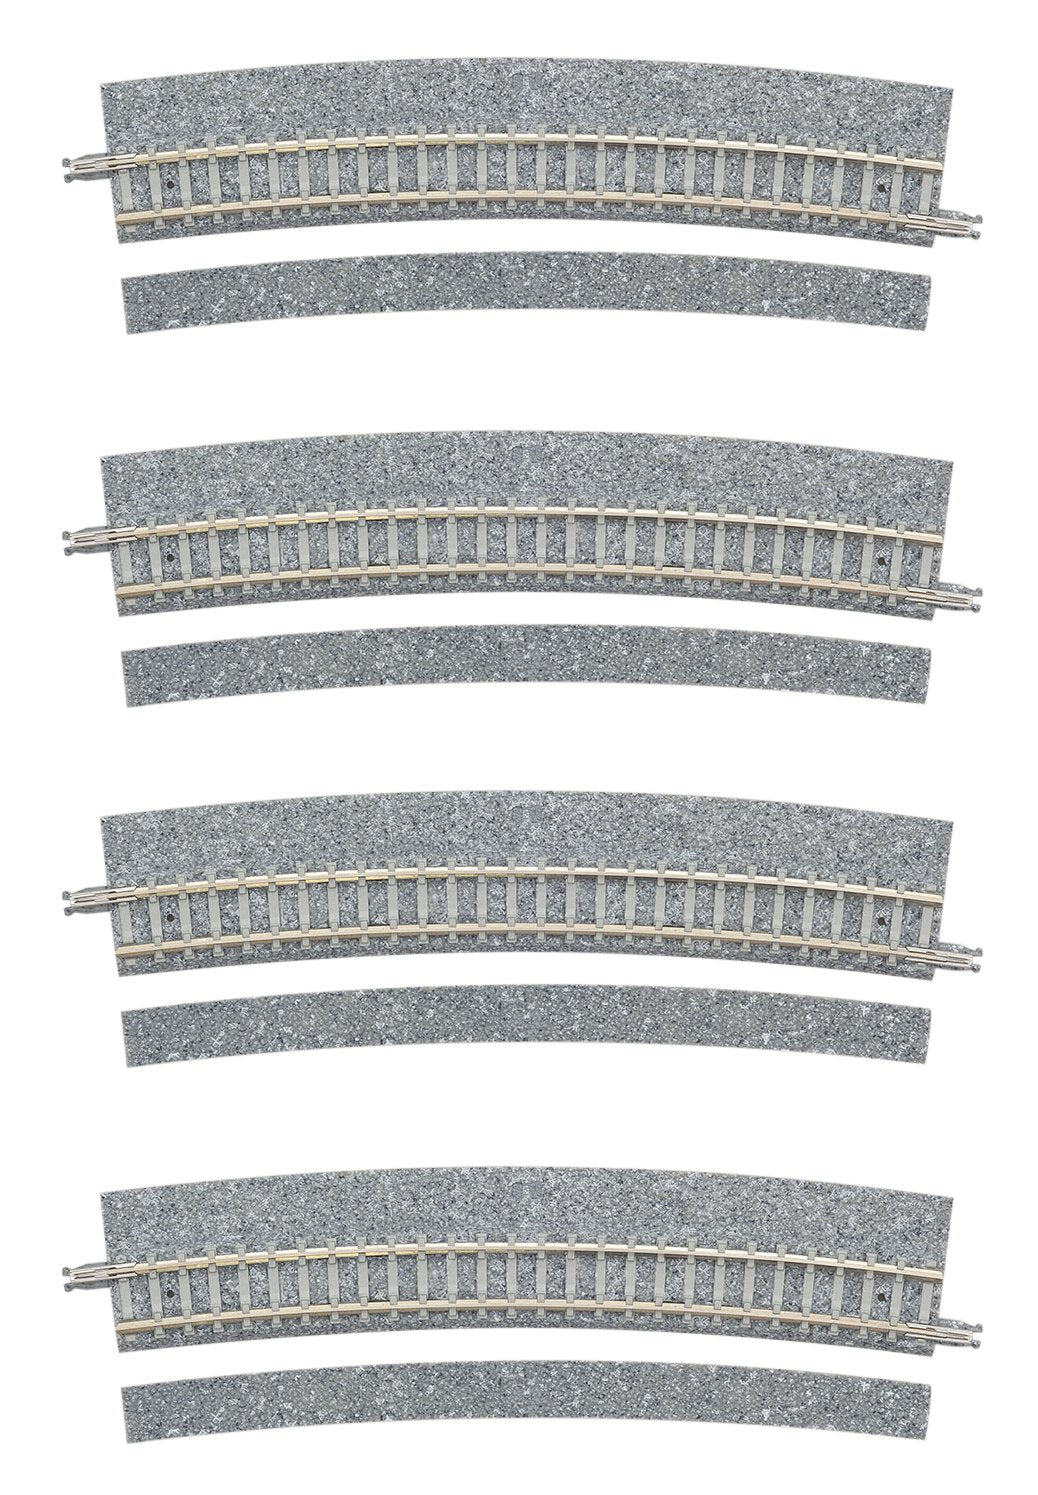 Fine Track Wide PC Curved Track C541-15-WP(F) (Set of 4)